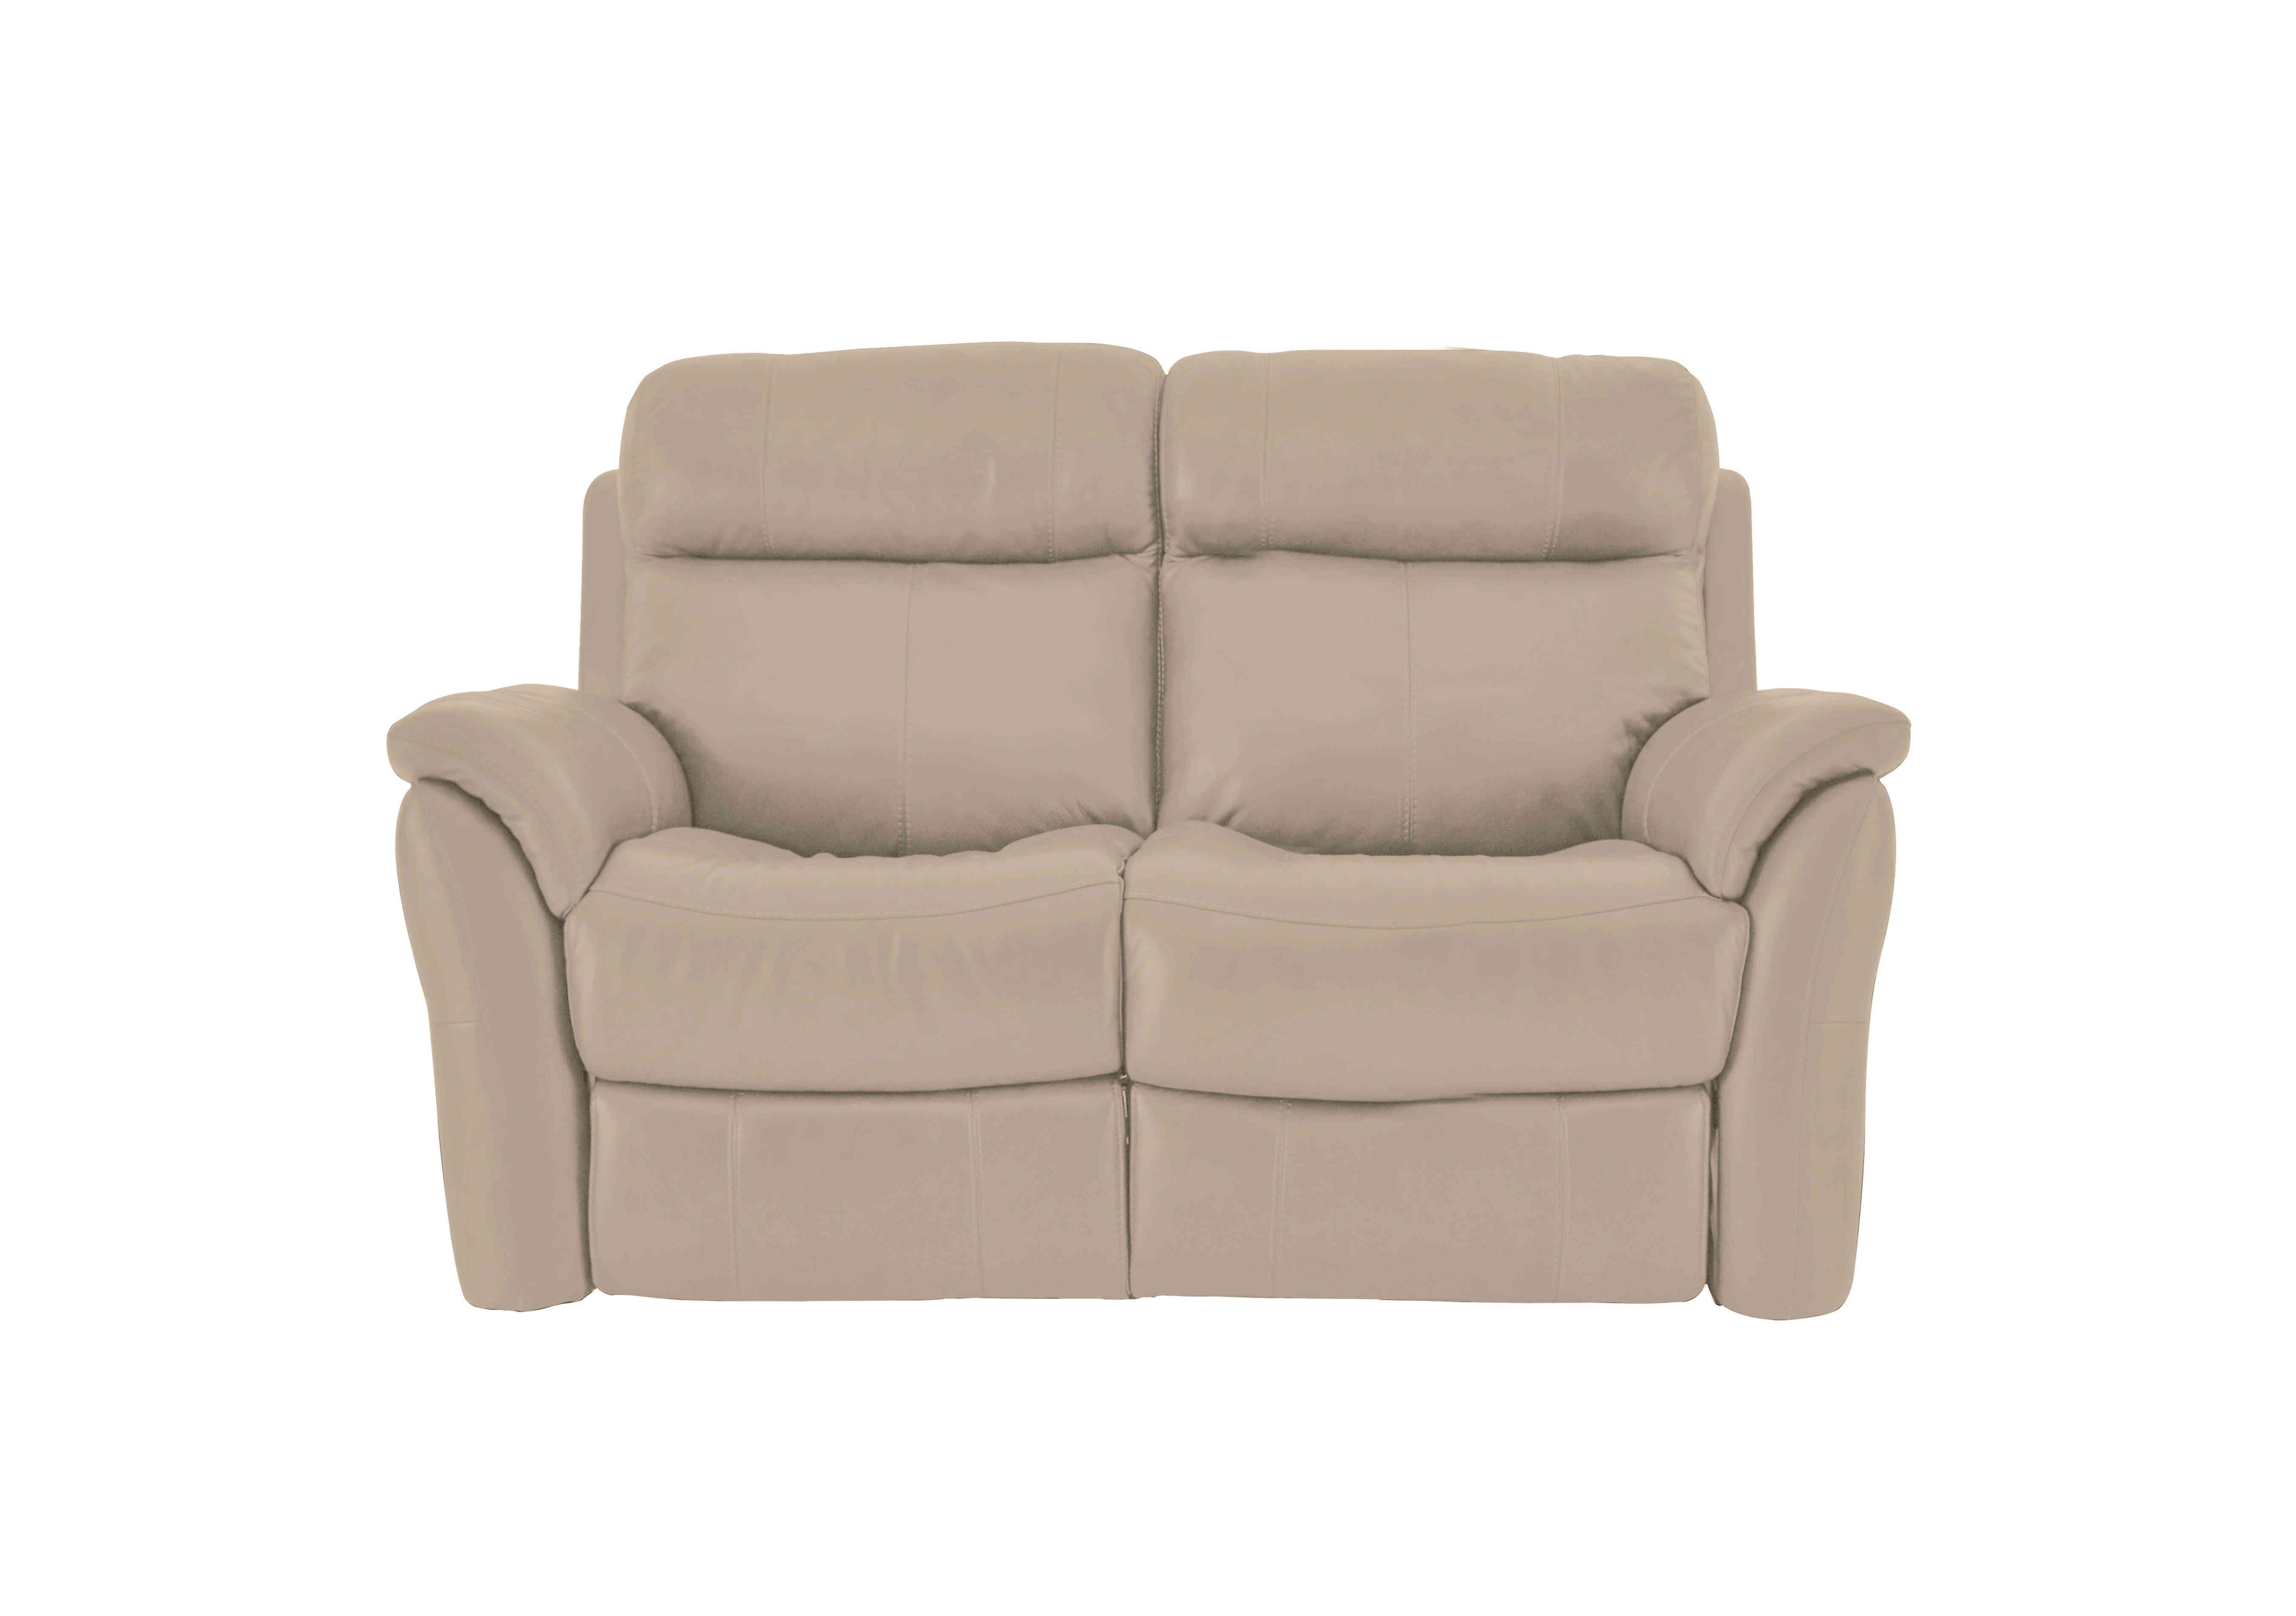 Relax Station Revive 2 Seater Leather Sofa in Bv-039c Pebble on Furniture Village